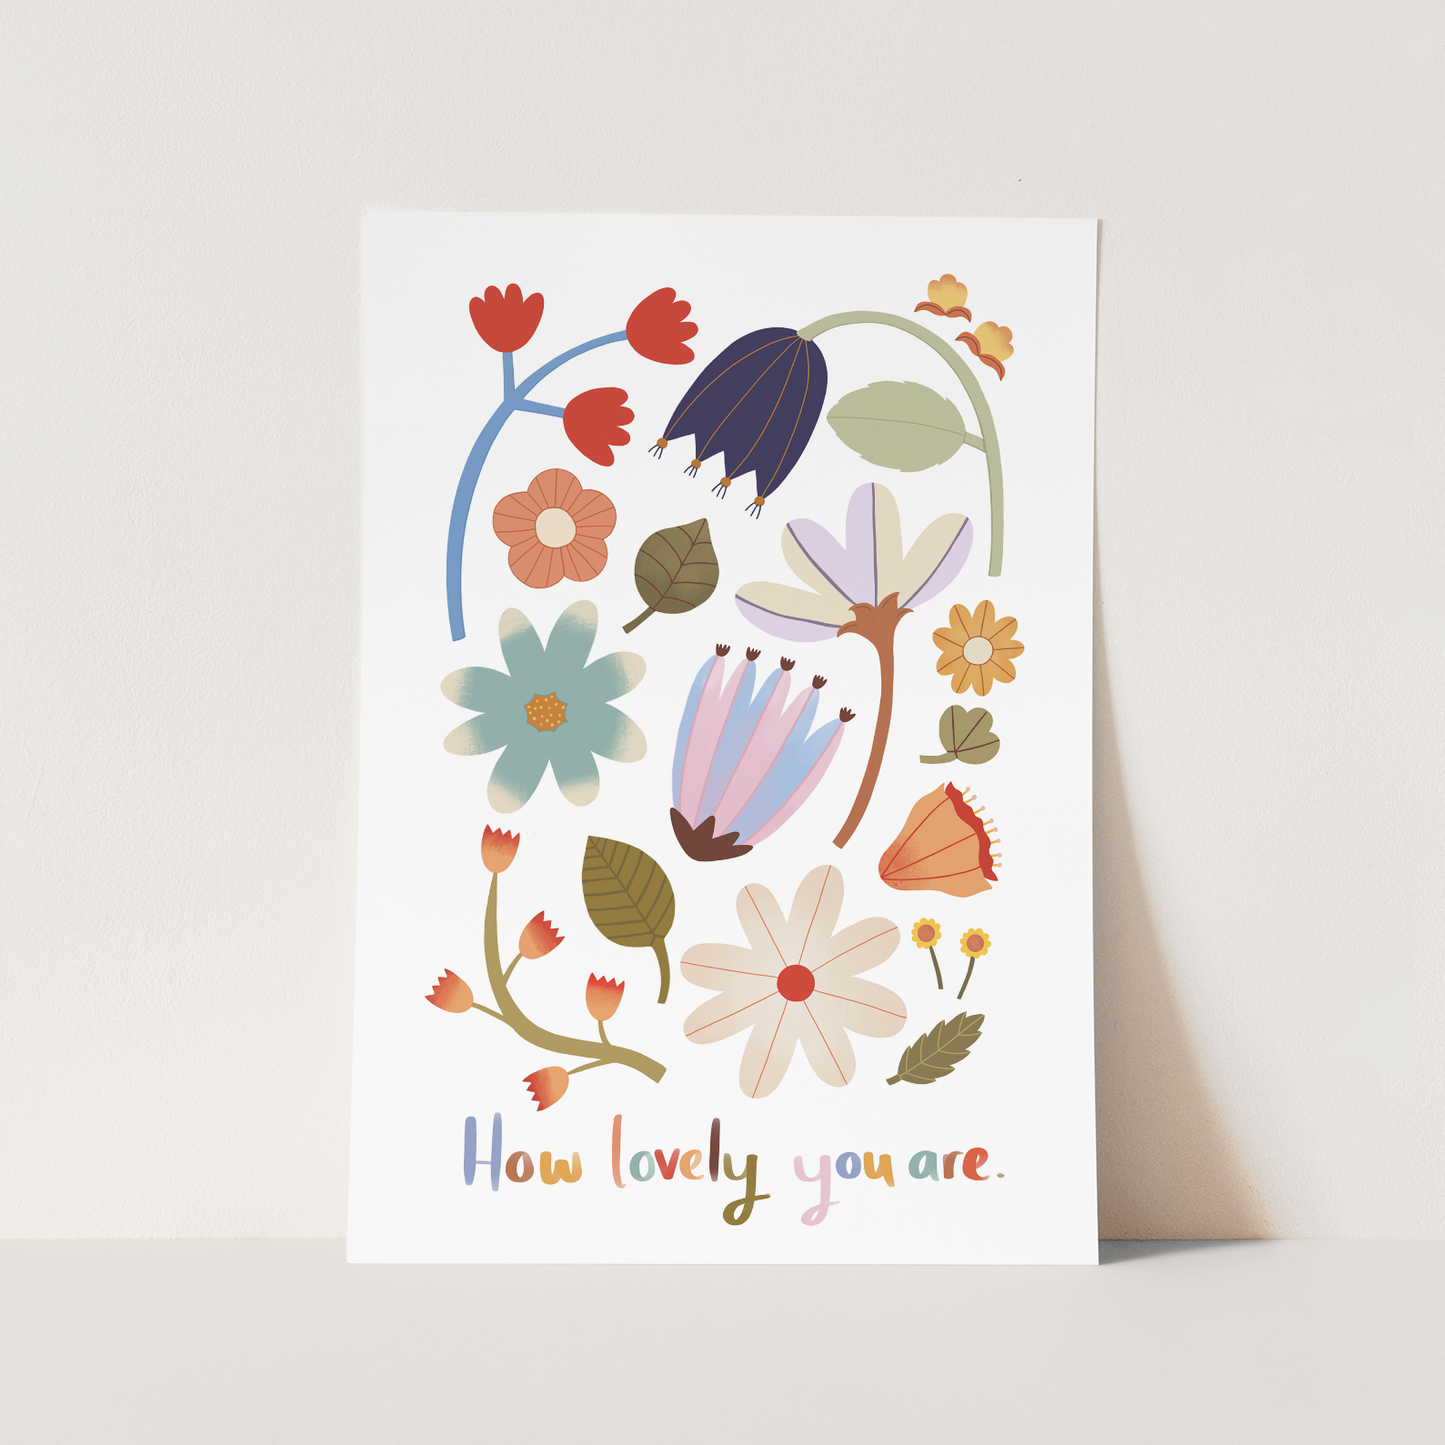 How lovely you are / Fine Art Print